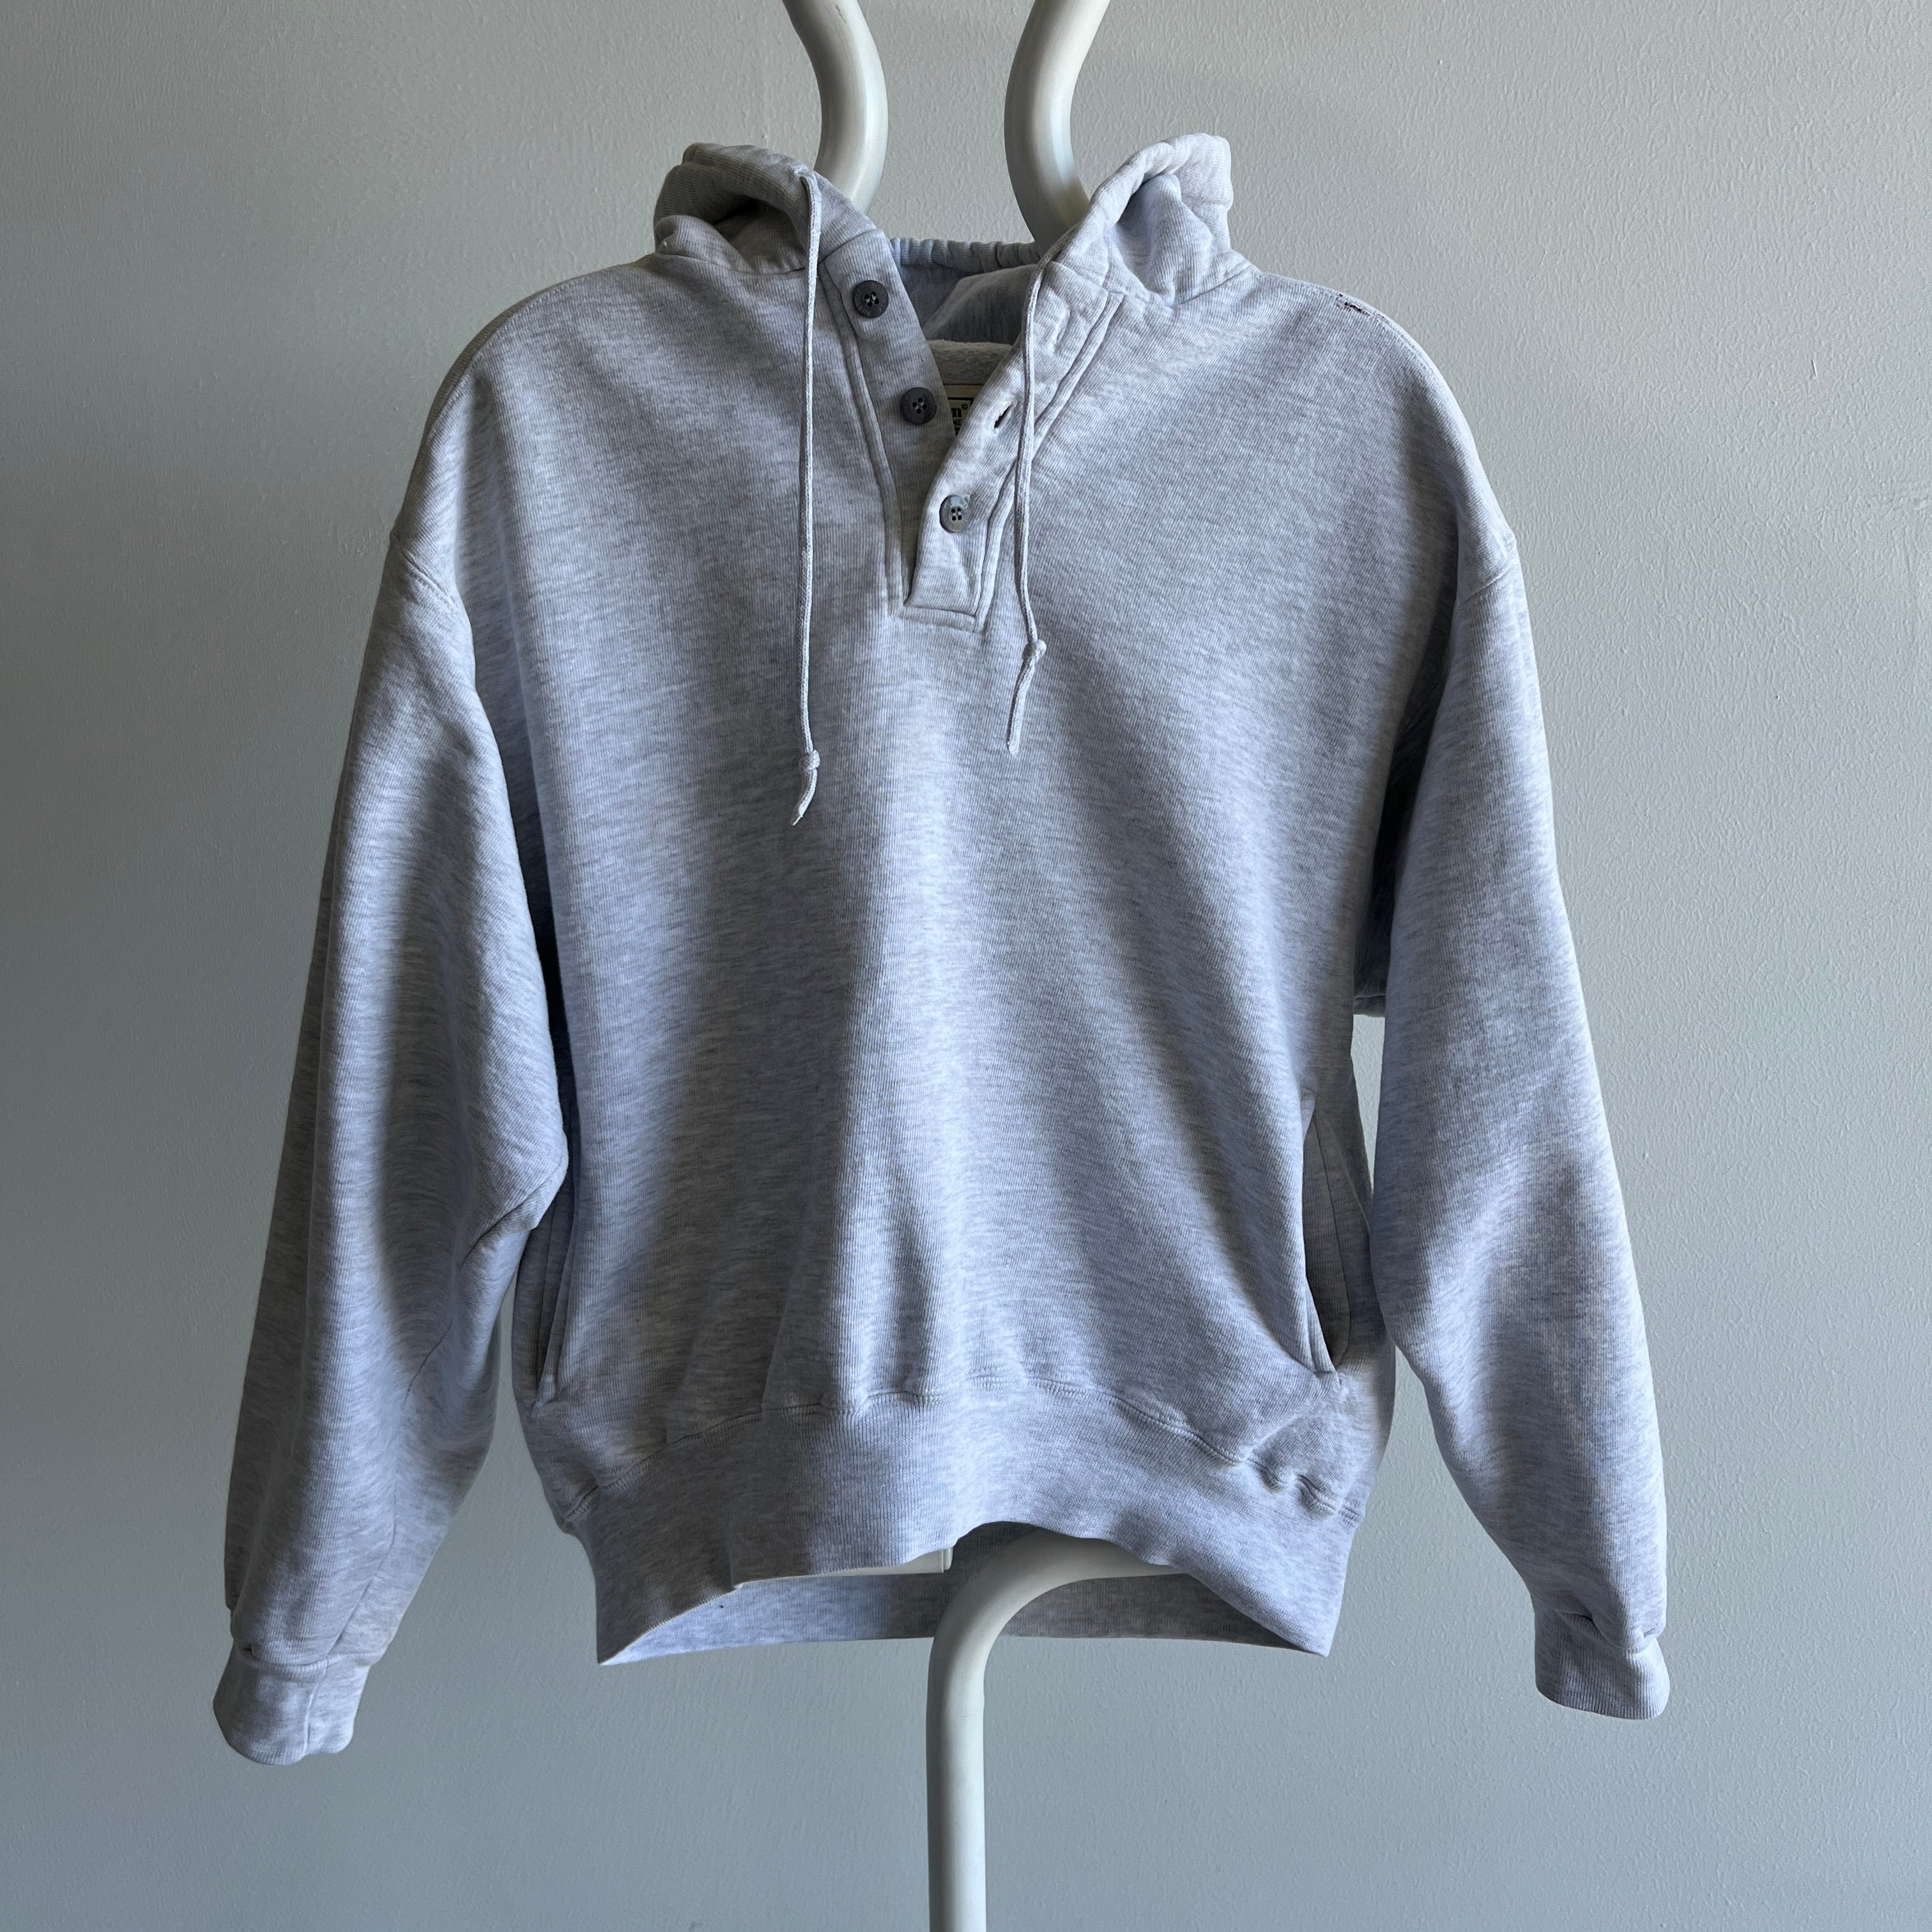 1990s L.L.Bean x Russell Brand Collab - The Perfect Heavyweight Henley Hoodie with Pockets!